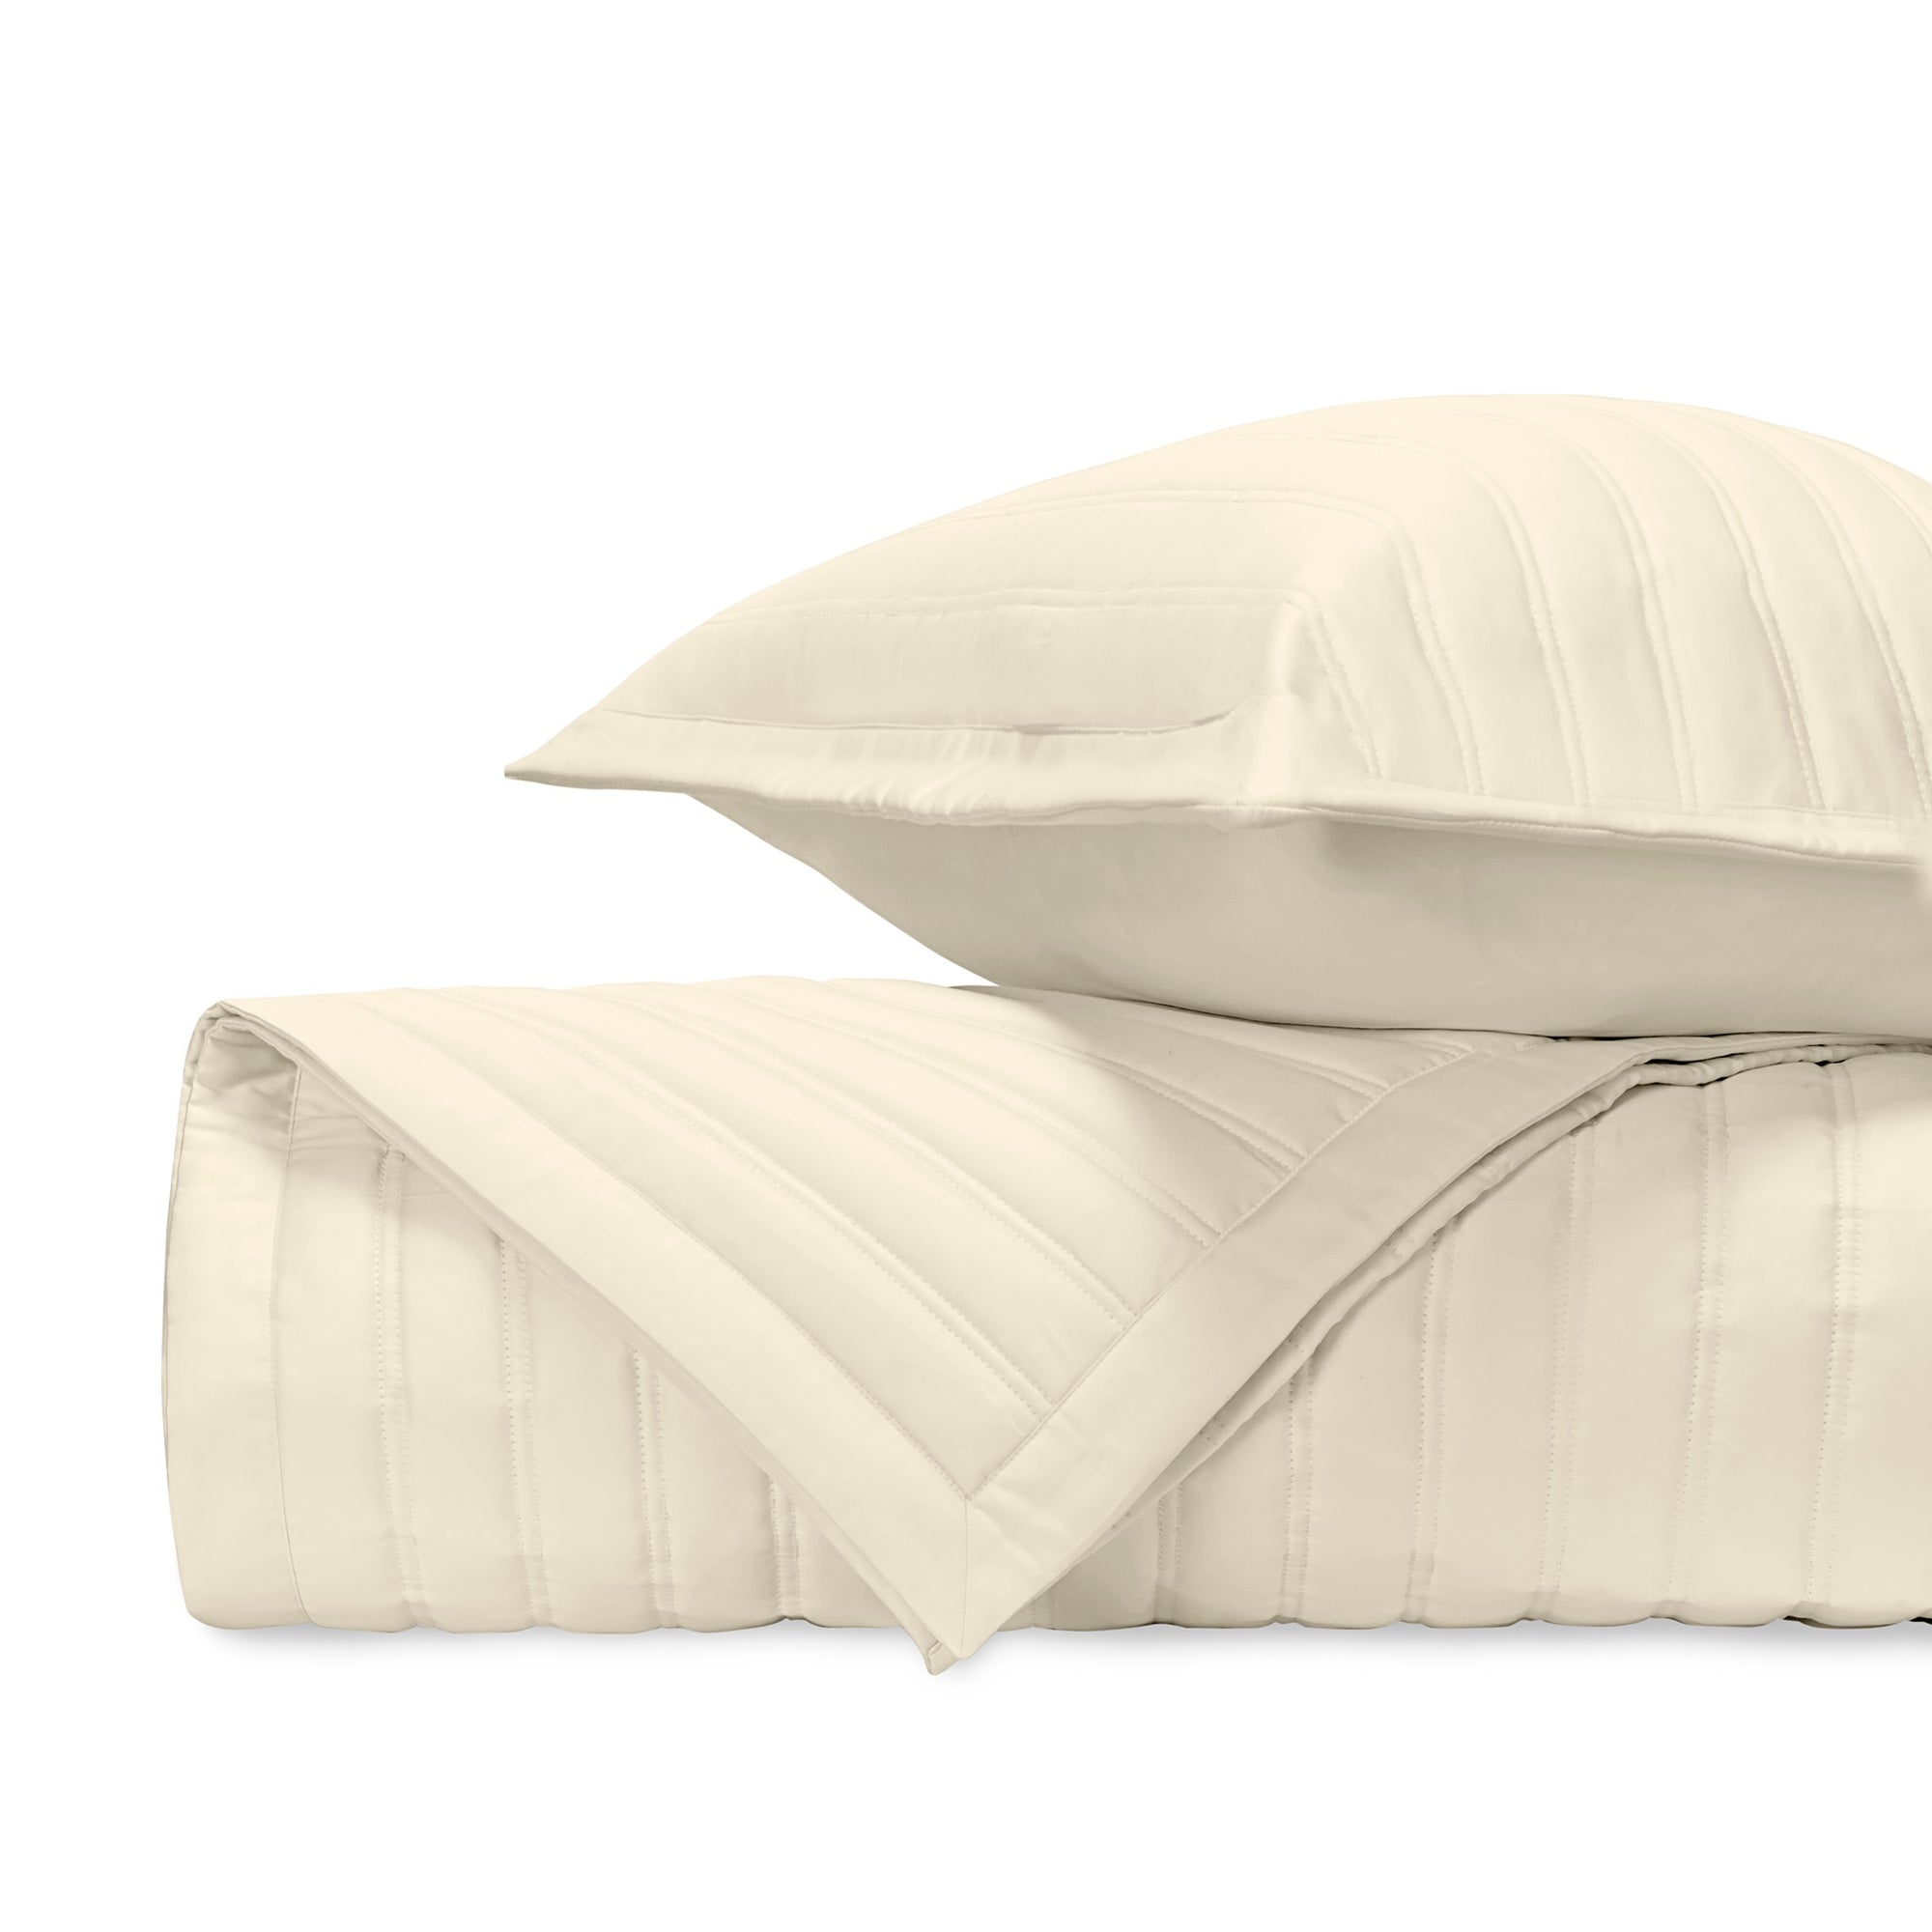 Stack Image of Home Treasures L'Avenue Royal Sateen Quilted Bedding in Color Ivory